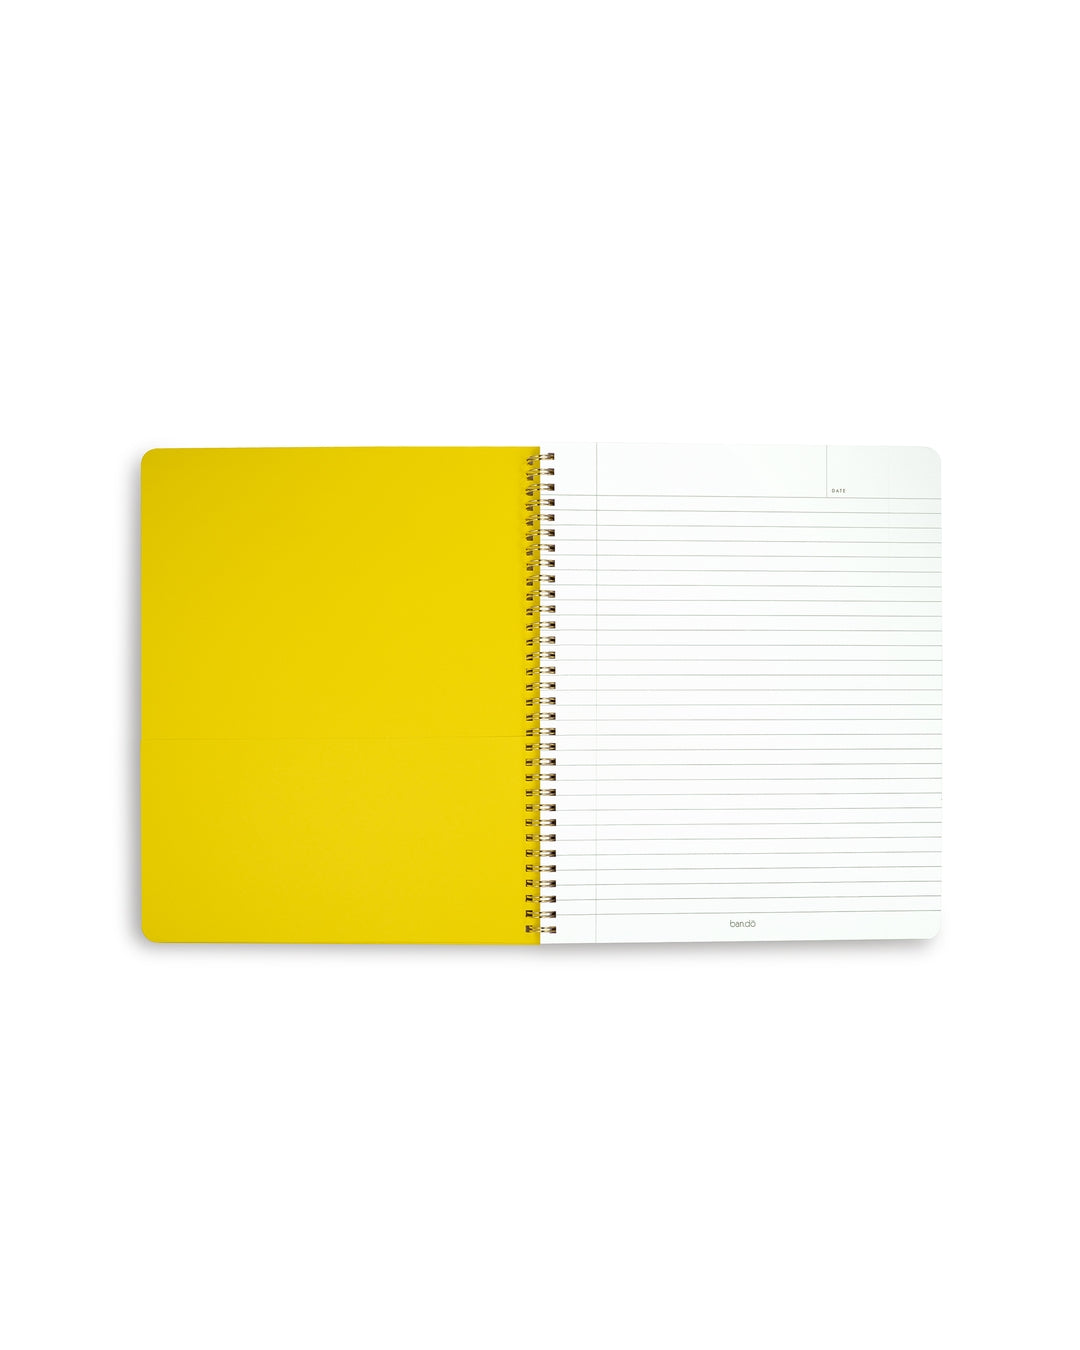 Rough Draft Large Notebook - Making it Up As I Go Cream [PRE ORDER]